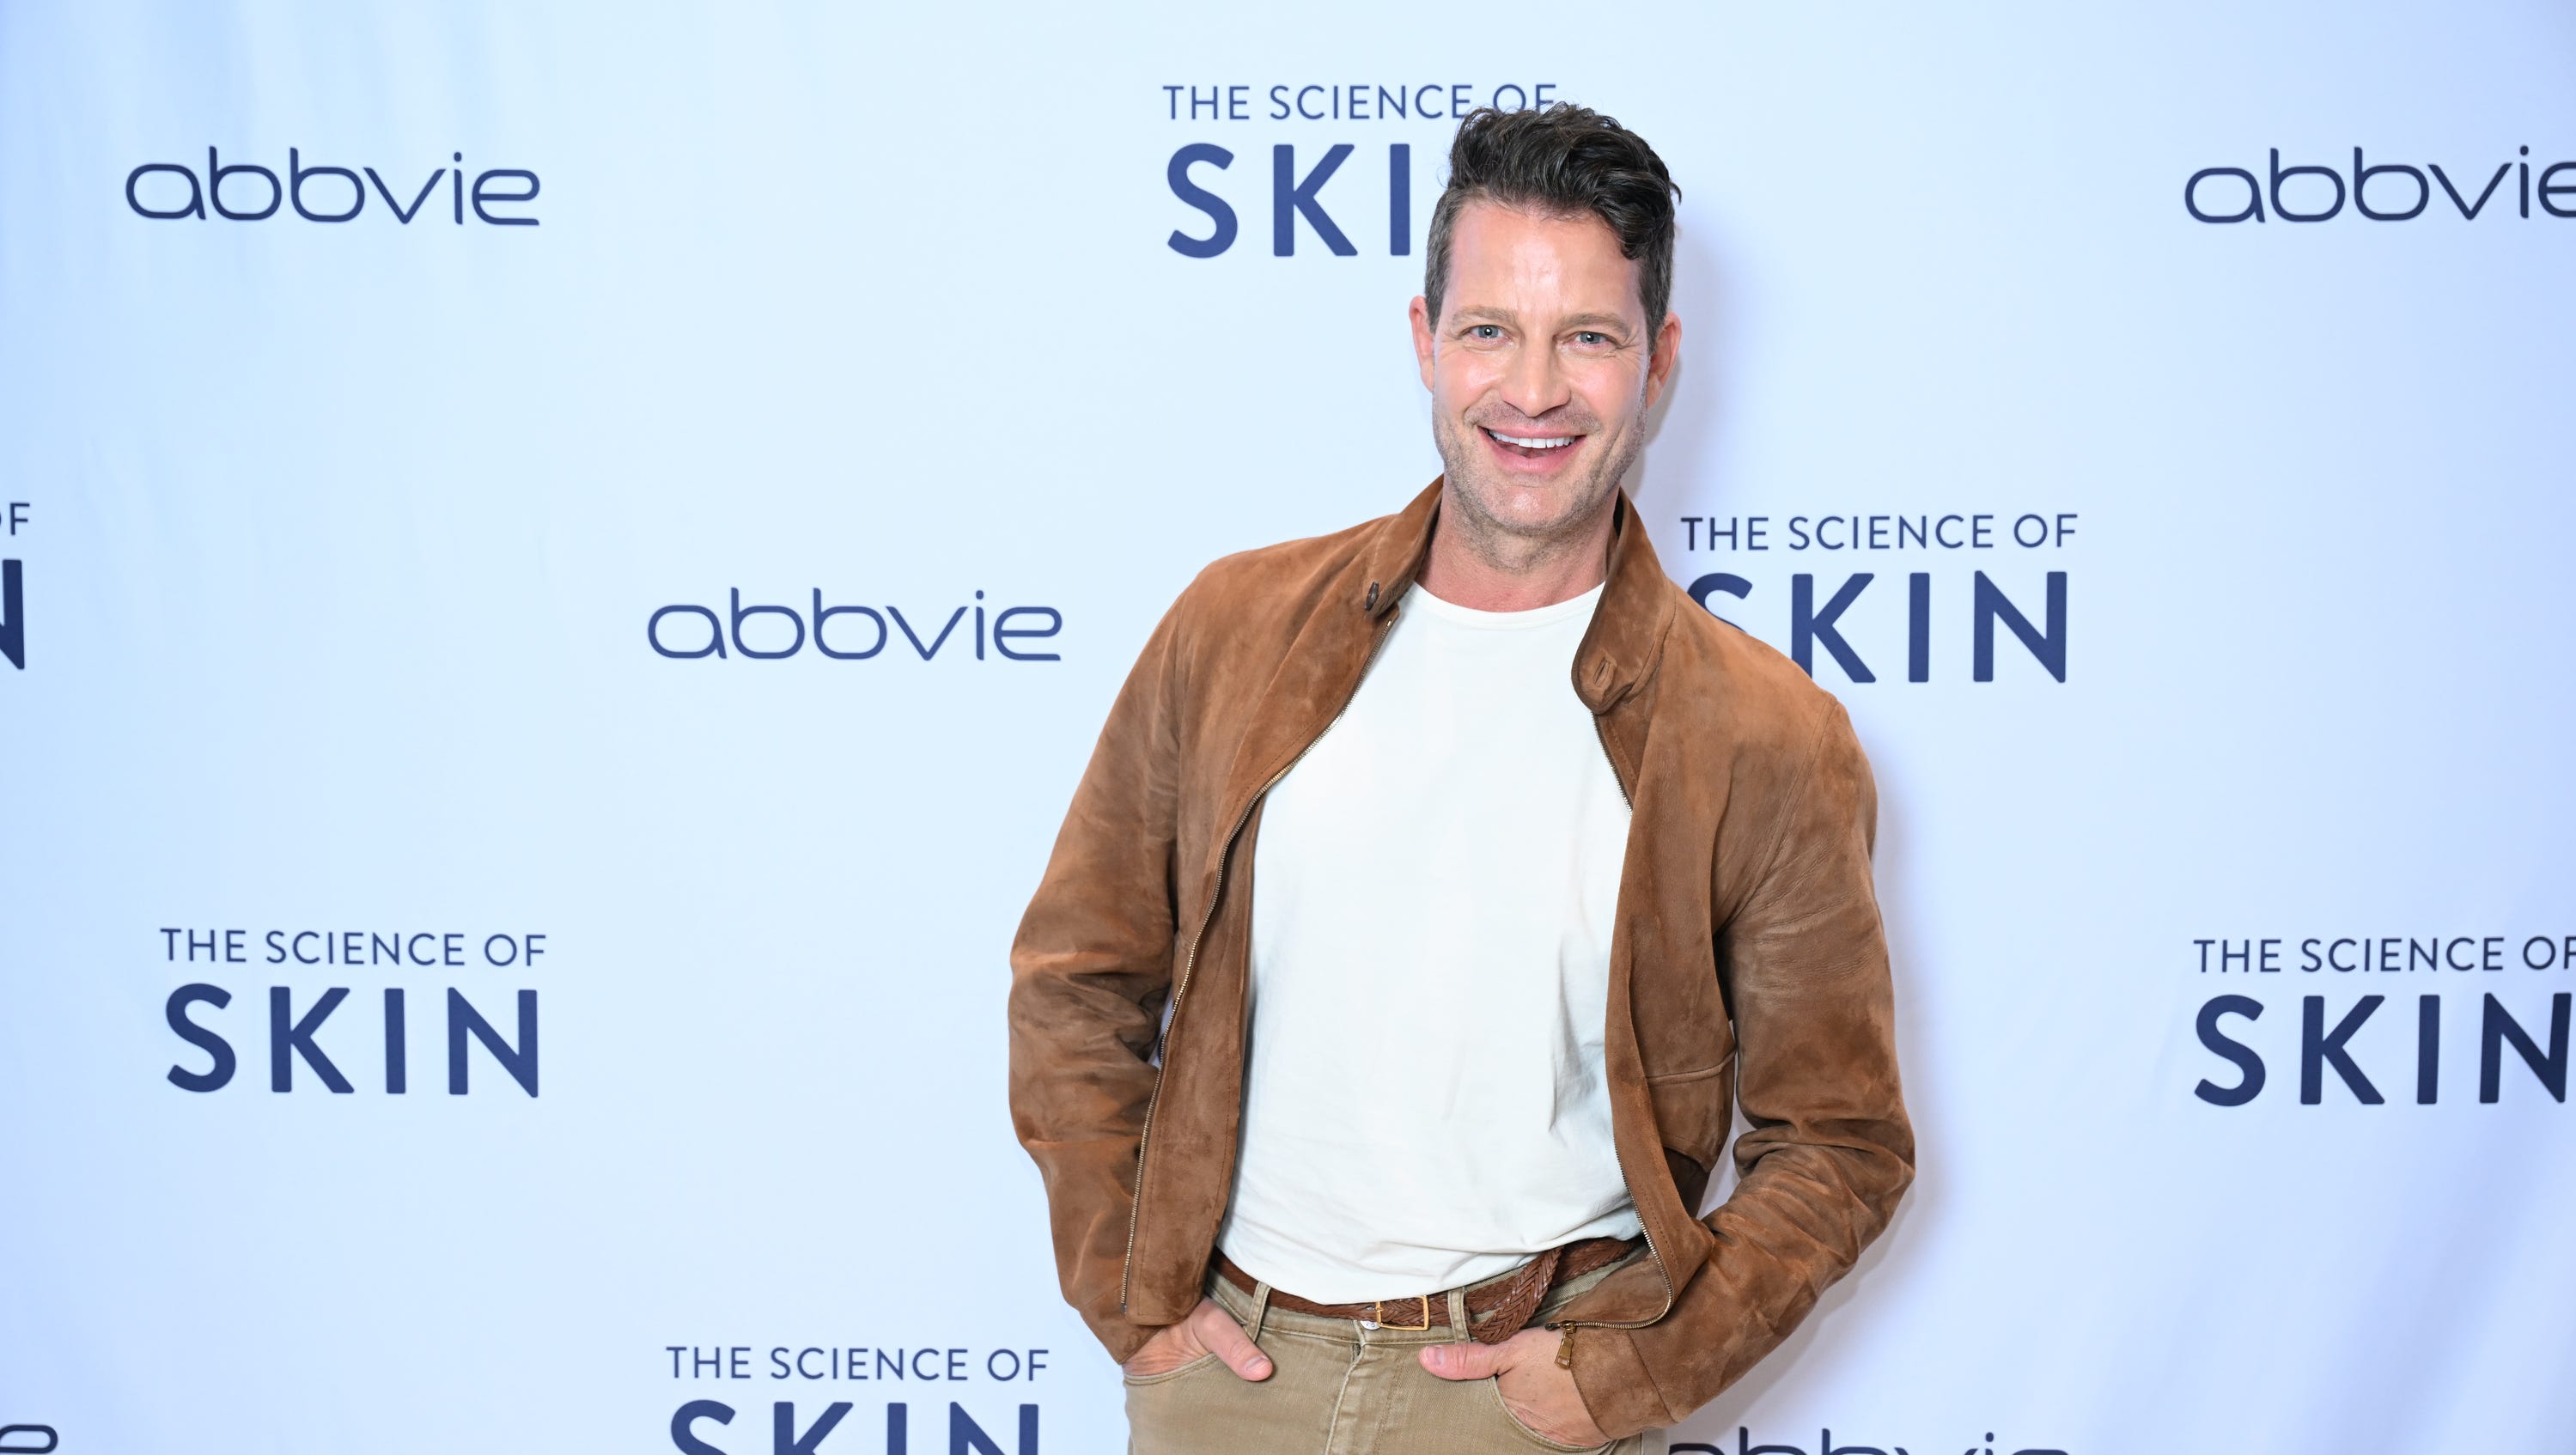 You know Nate Berkus from "The Oprah Winfrey Show" and HGTV – an interior designer with an eye for amazing aesthetics. What you might not know is that he's been privately battling the skin disease psoriasis.